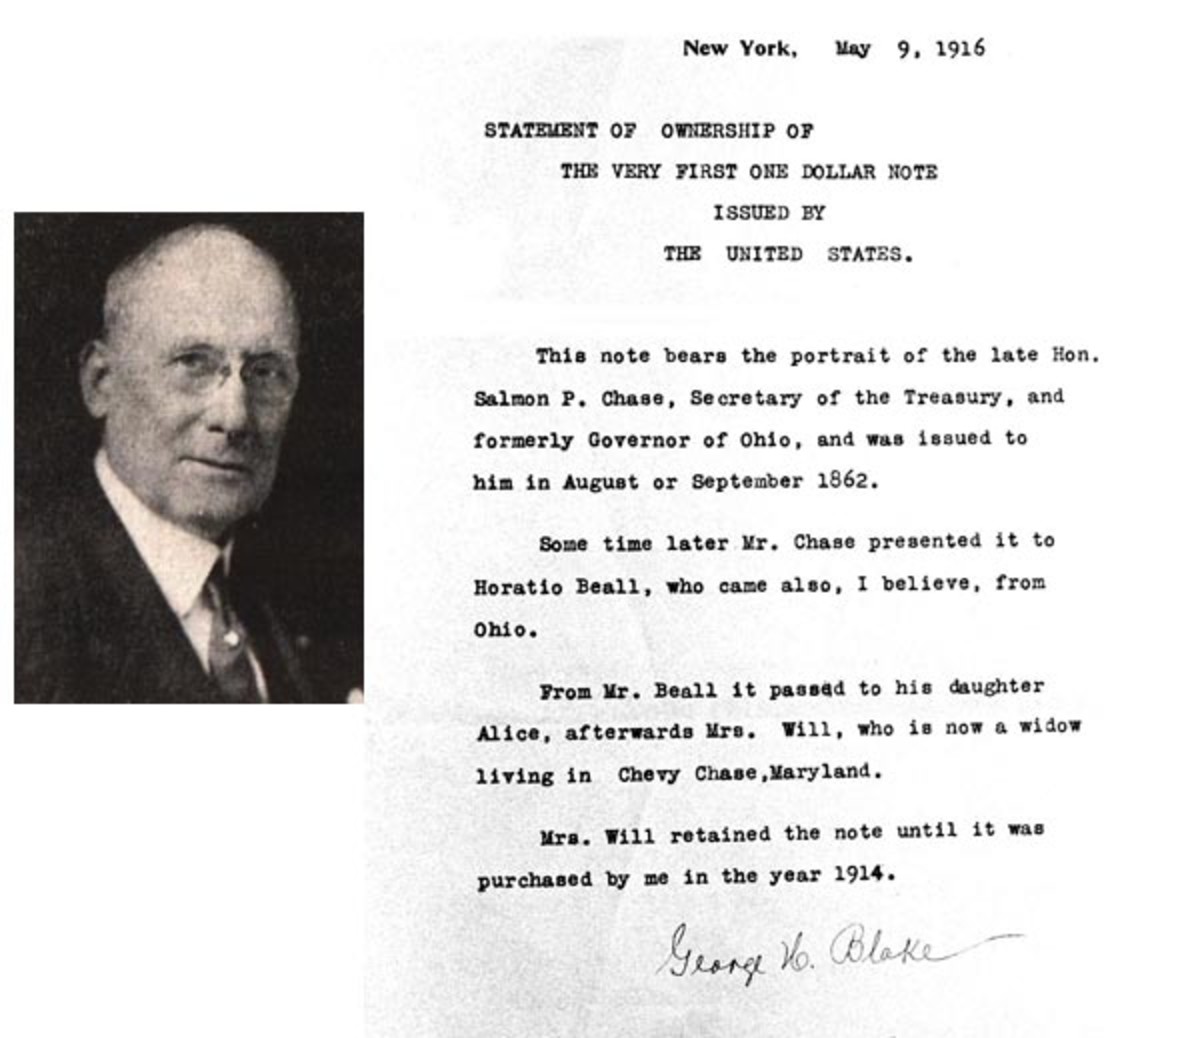  Figure 2. A photo of George Blake, left, which appeared in his obituary in 'The Numismatist' (1956). At right, memo in possession of the Chase Manhattan Bank written by George Blake that chronicled the route the $1 note took to reach him.